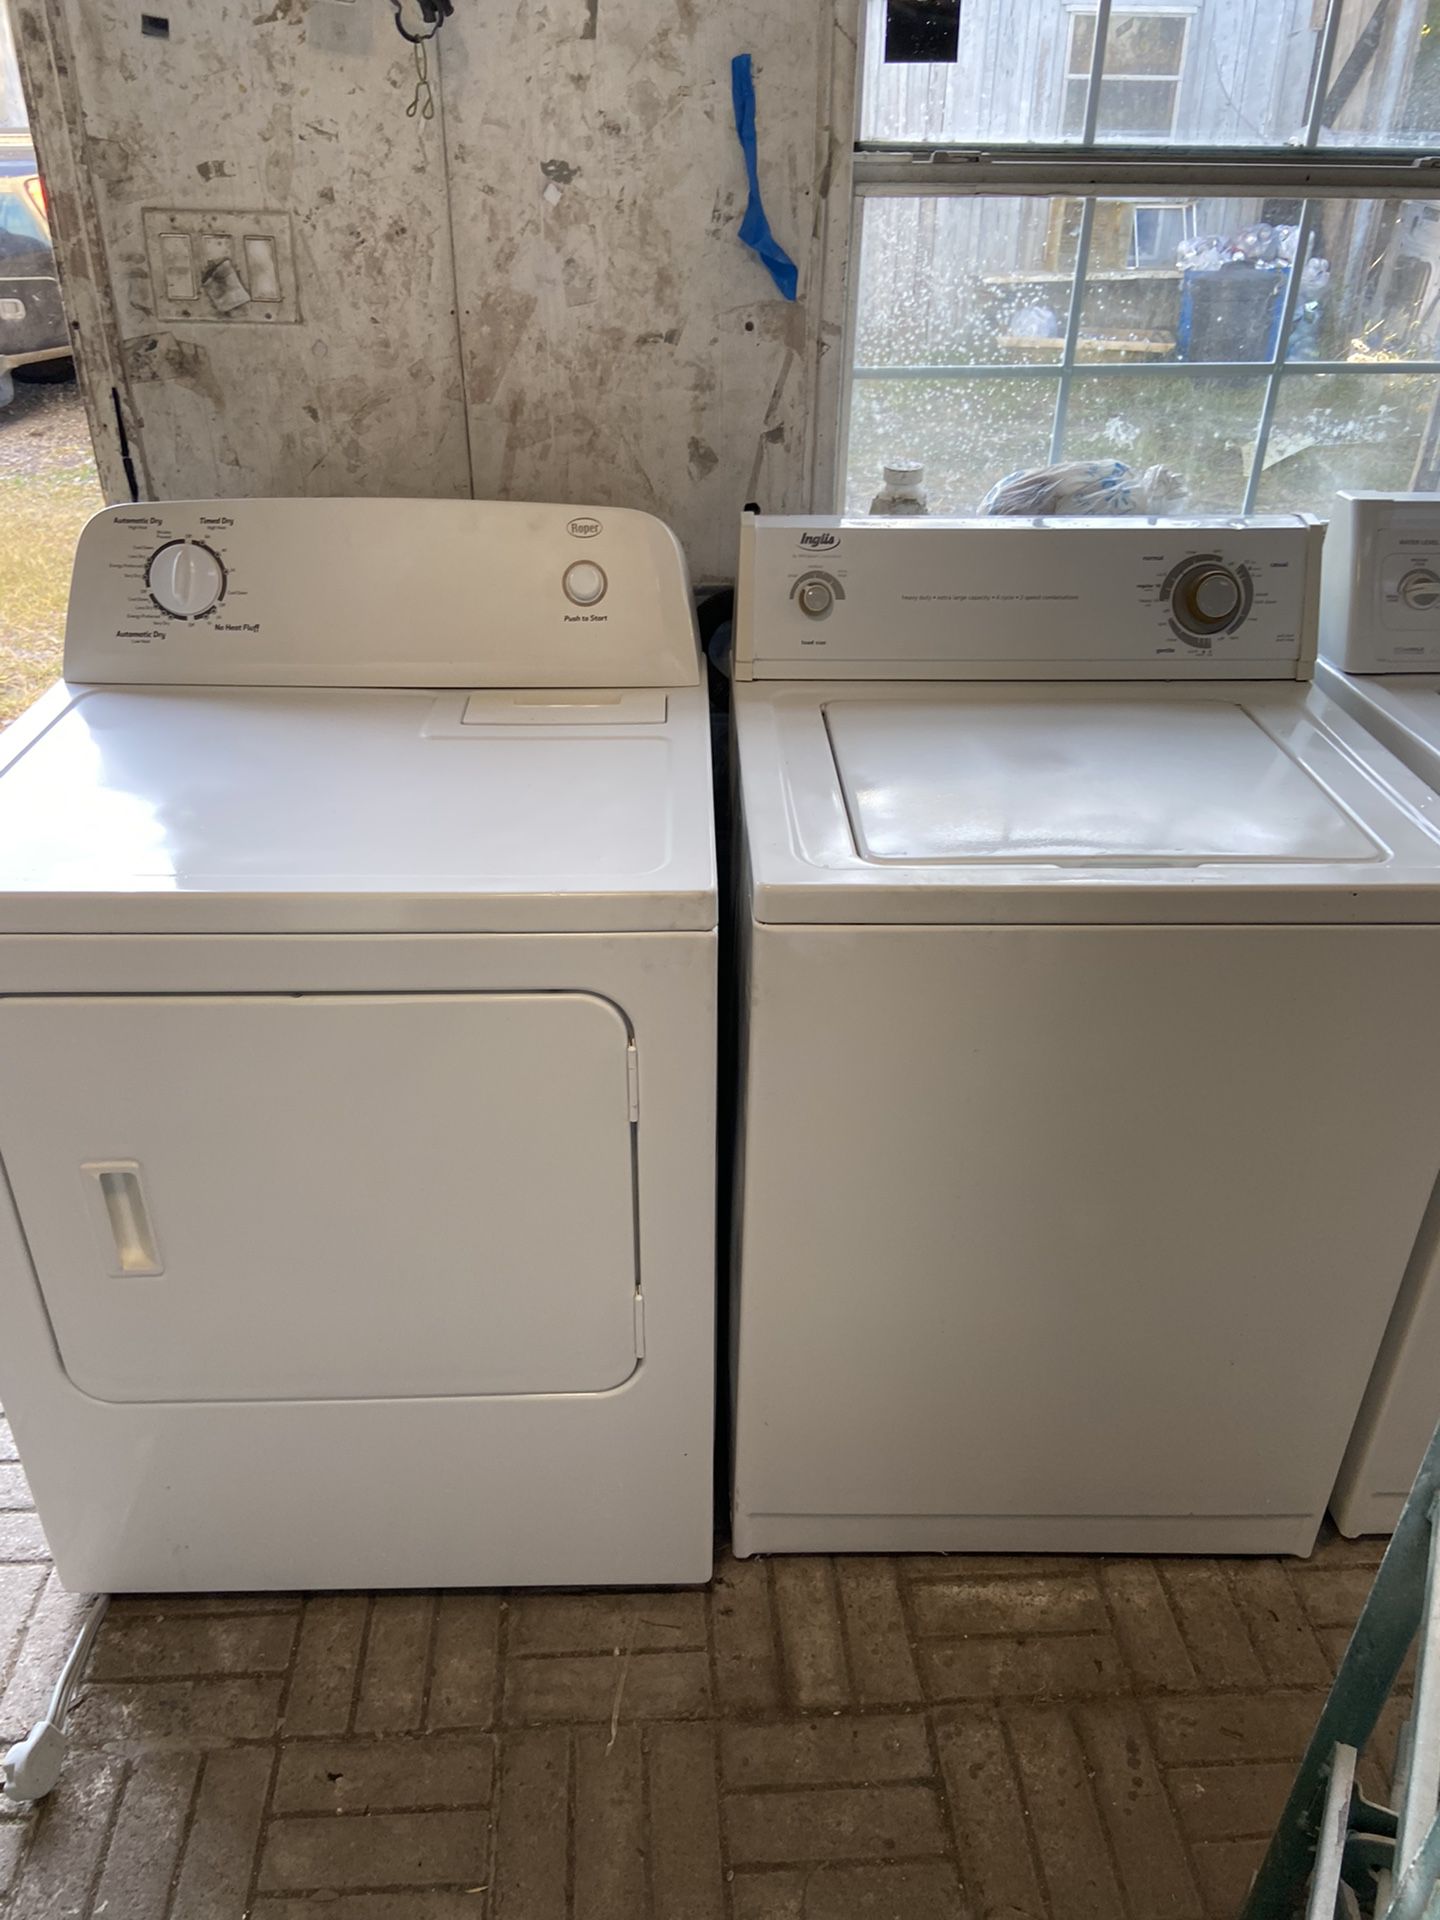 EXCELLENT RUNNING WHIRLPOOL  HEAVY DUTY EXTRA LARGE CAPACITY WASHER & ELECTRIC DRYER SET. NO ISSUES WITH EITHER. BOTH RUN LIKE NEW. ILL RUN BOTH FOR Y